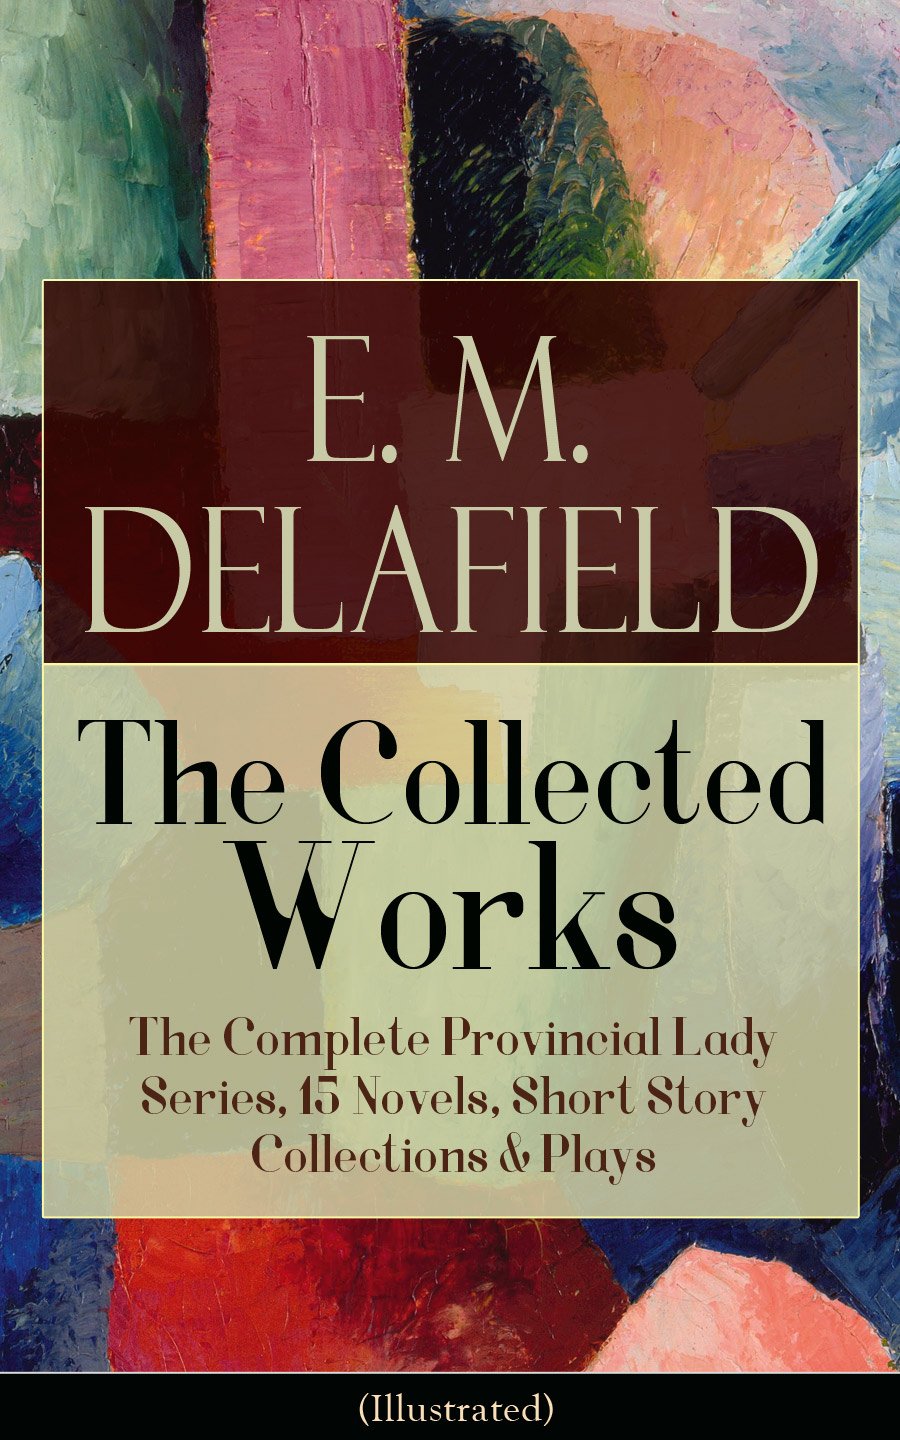 Short novels. Э М Делафилд. Diary of a Provincial Lady by e. m. Delafield. Э. М. Делафилд дневник провинциальной дамы. Pan books the Provincial Lady.